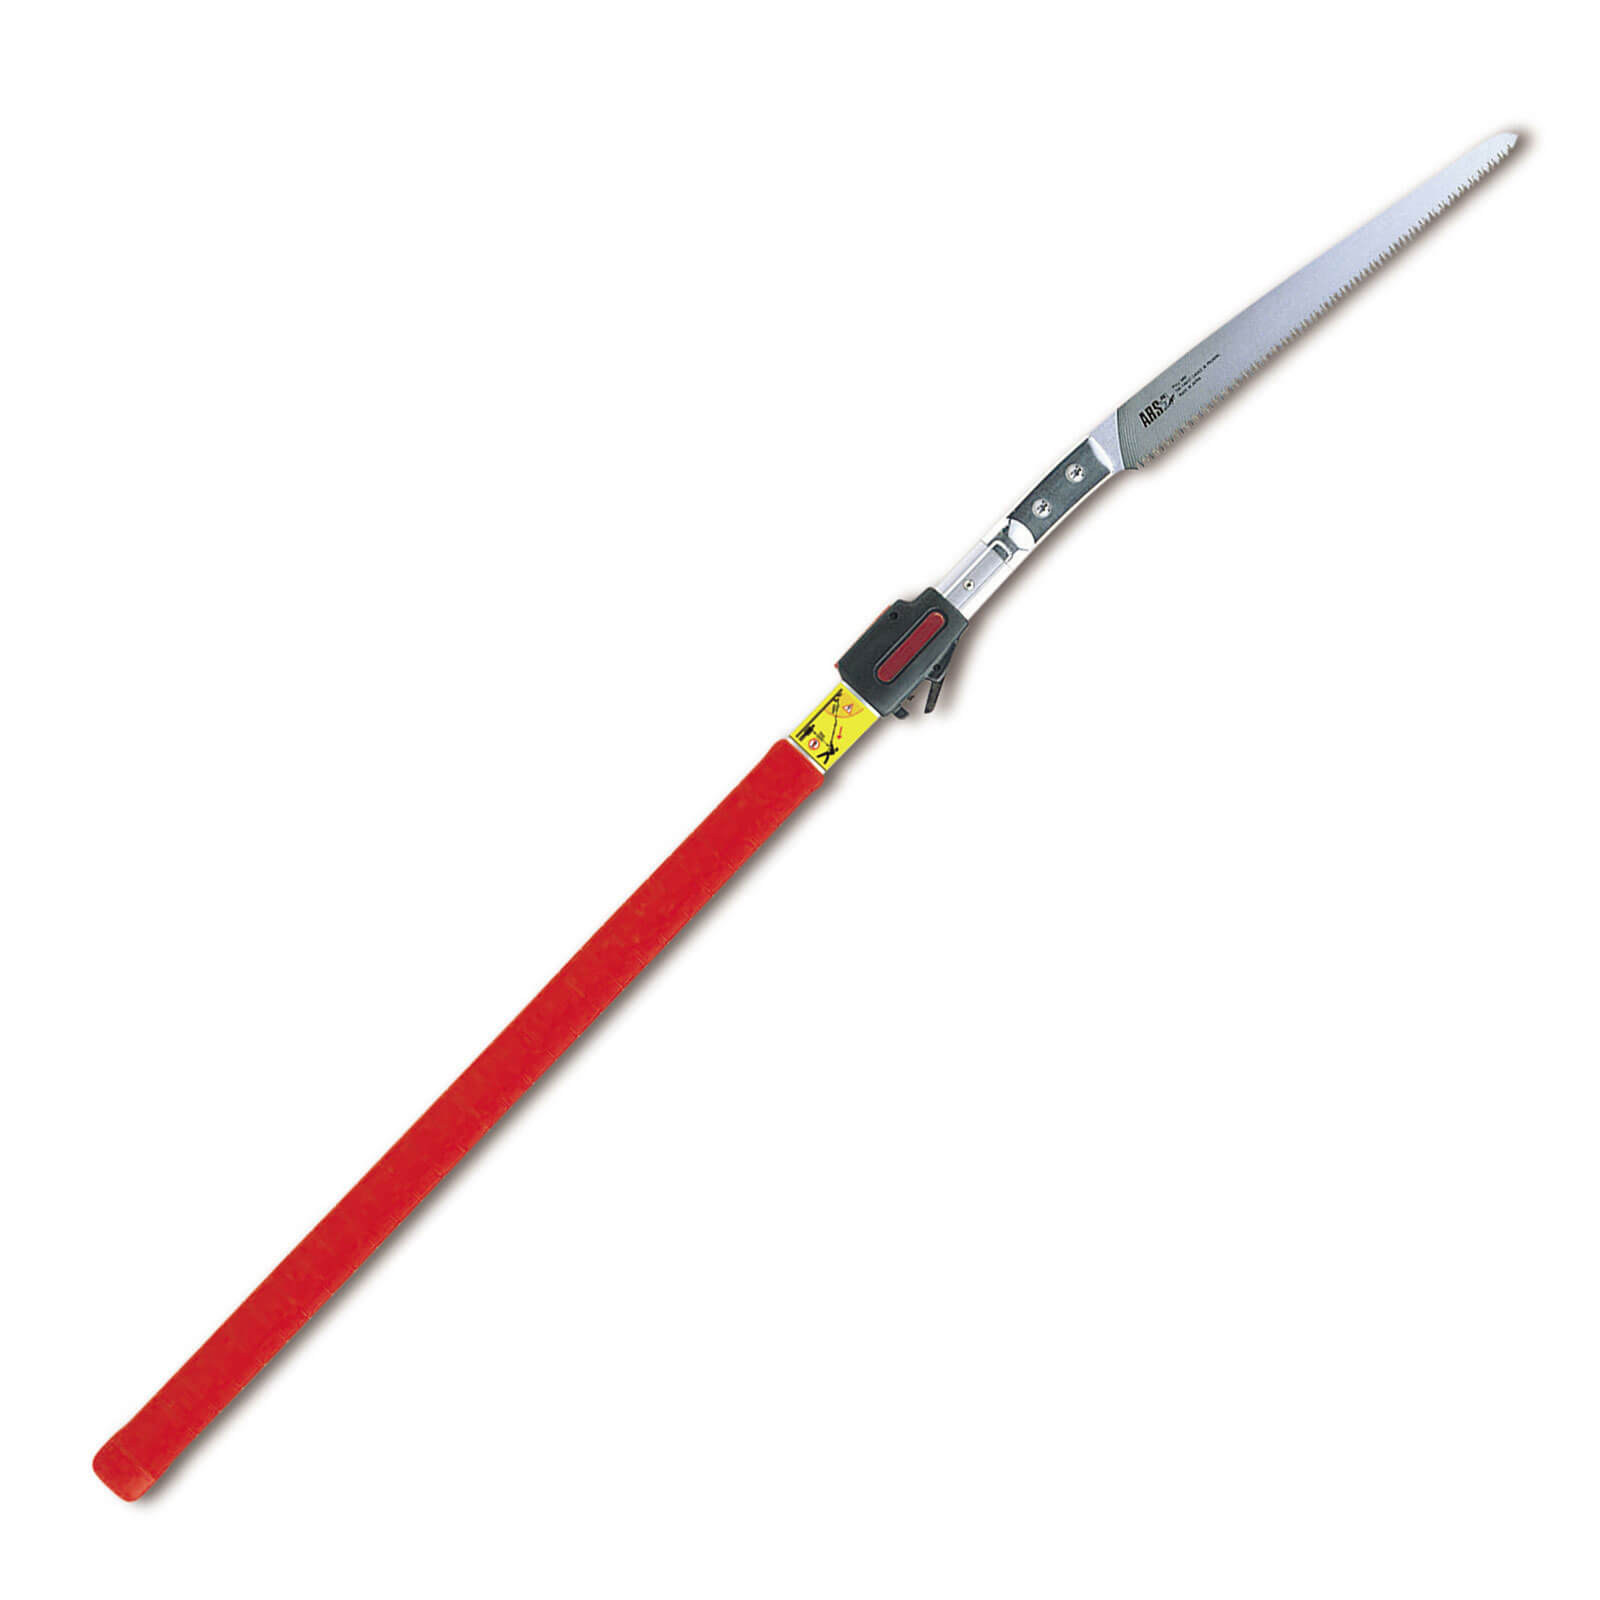 Image of ARS EXW-2.7 Telescopic Pruning Pole Saw 1800mm